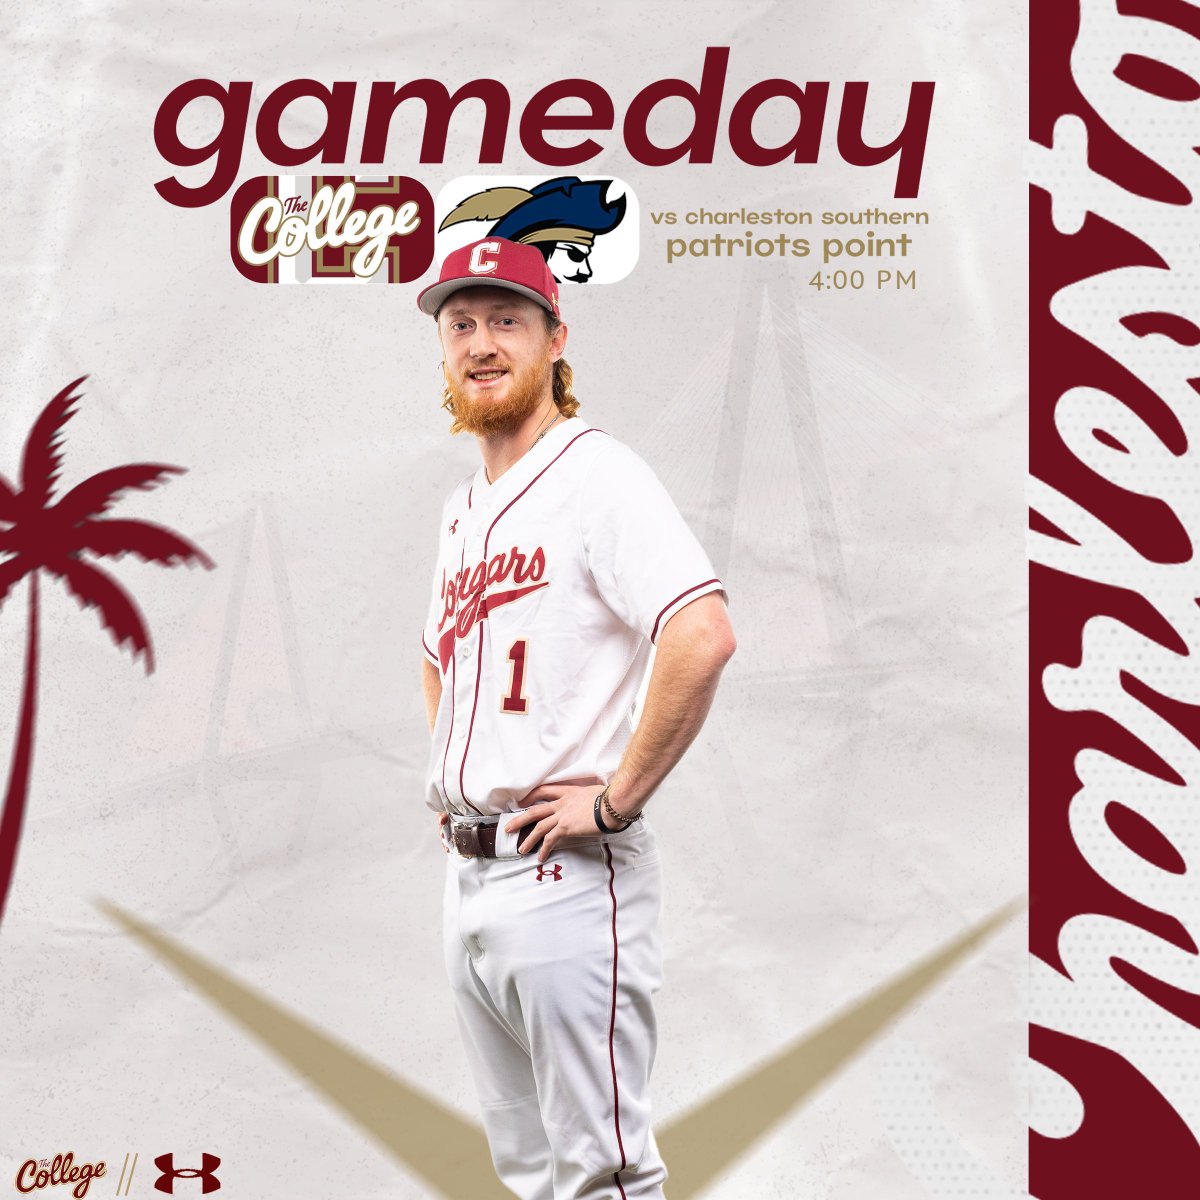 One more with the Bucs

🆚 Charleston Southern
📍 Patriots Point
⏰ 4:00 PM
📺 @flosports 
📊 bit.ly/3OL4J7P

#TheCollege 🌴⚾️